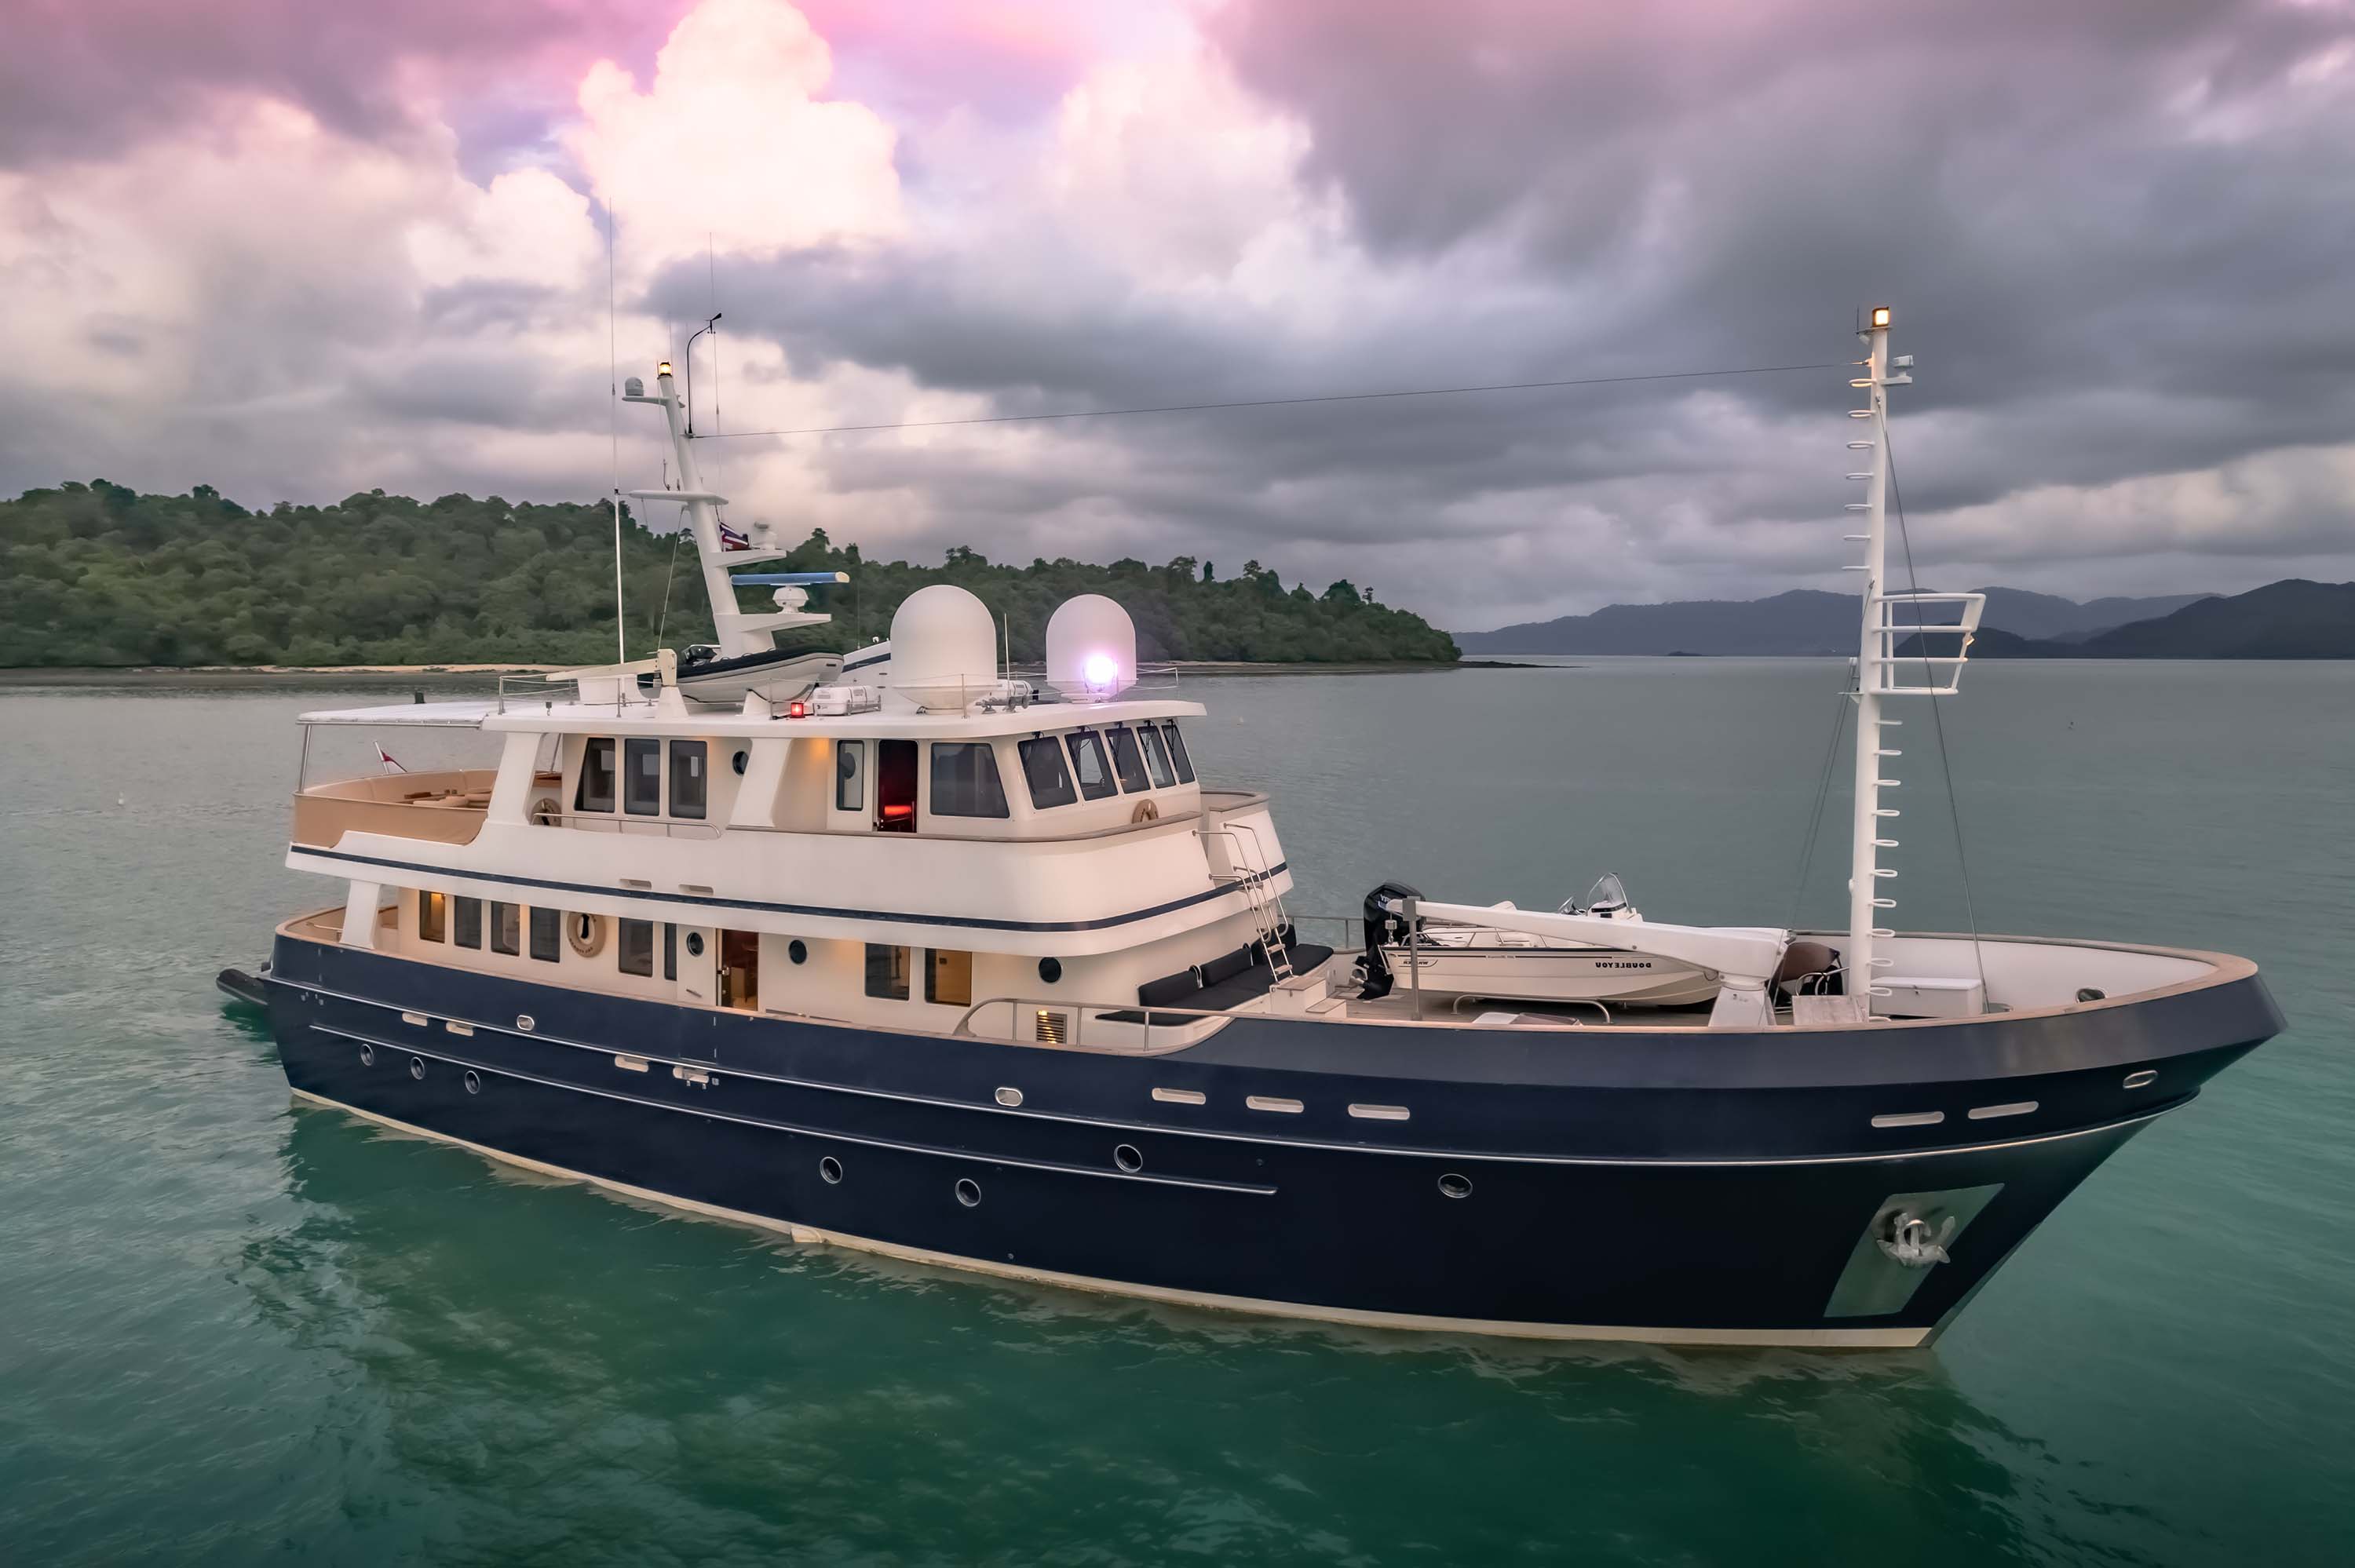 DOUBLEYOU 90' () Cheoy Lee Yacht For Sale